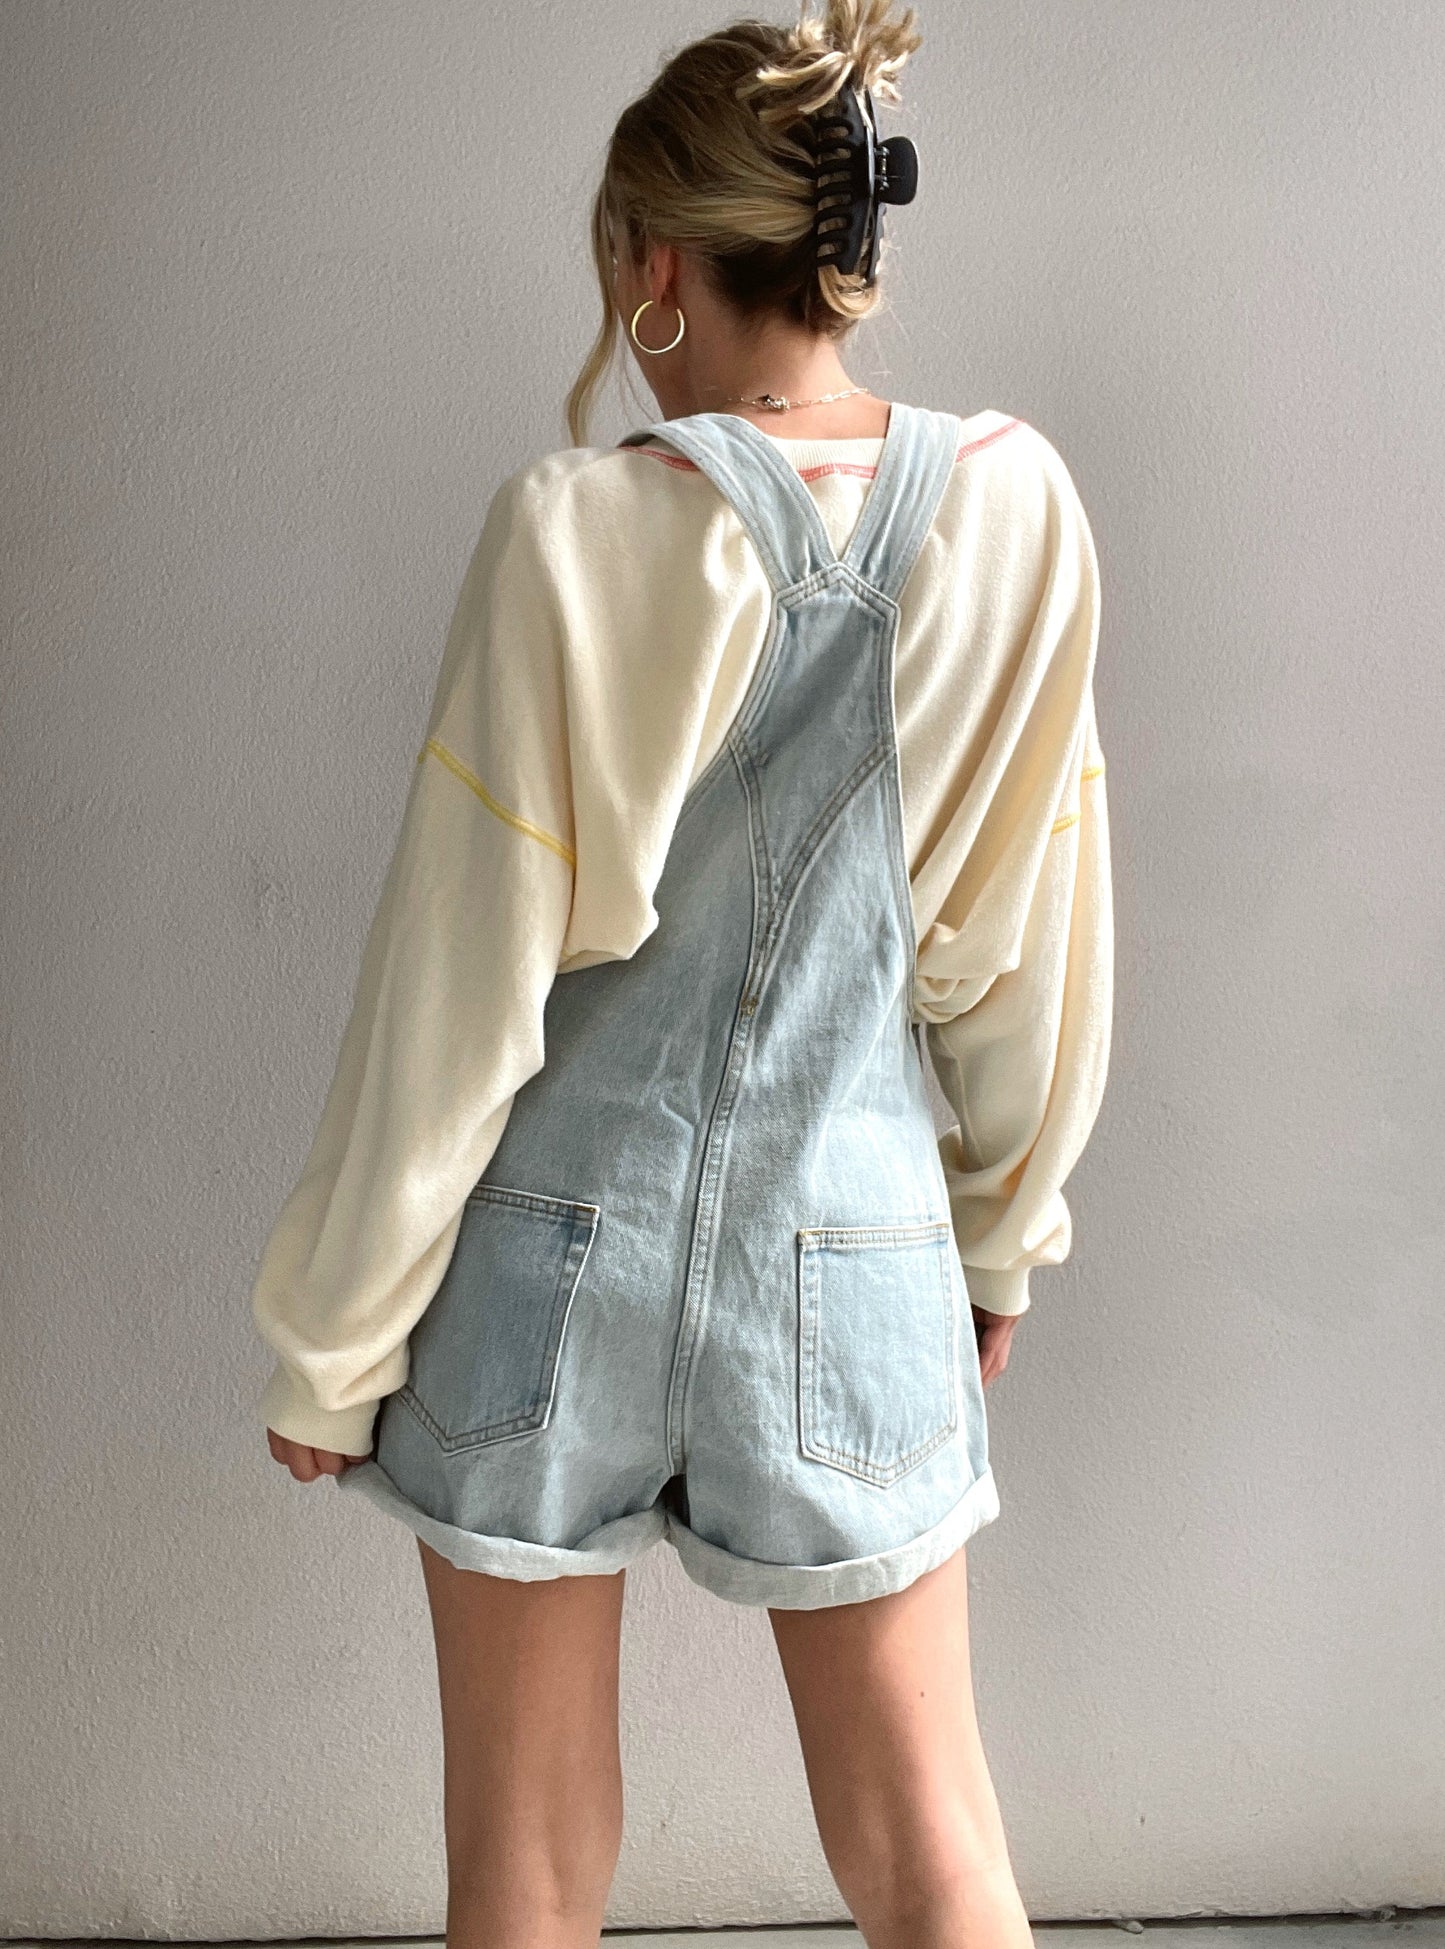 Oversized woven denim overall shorts with cuffs